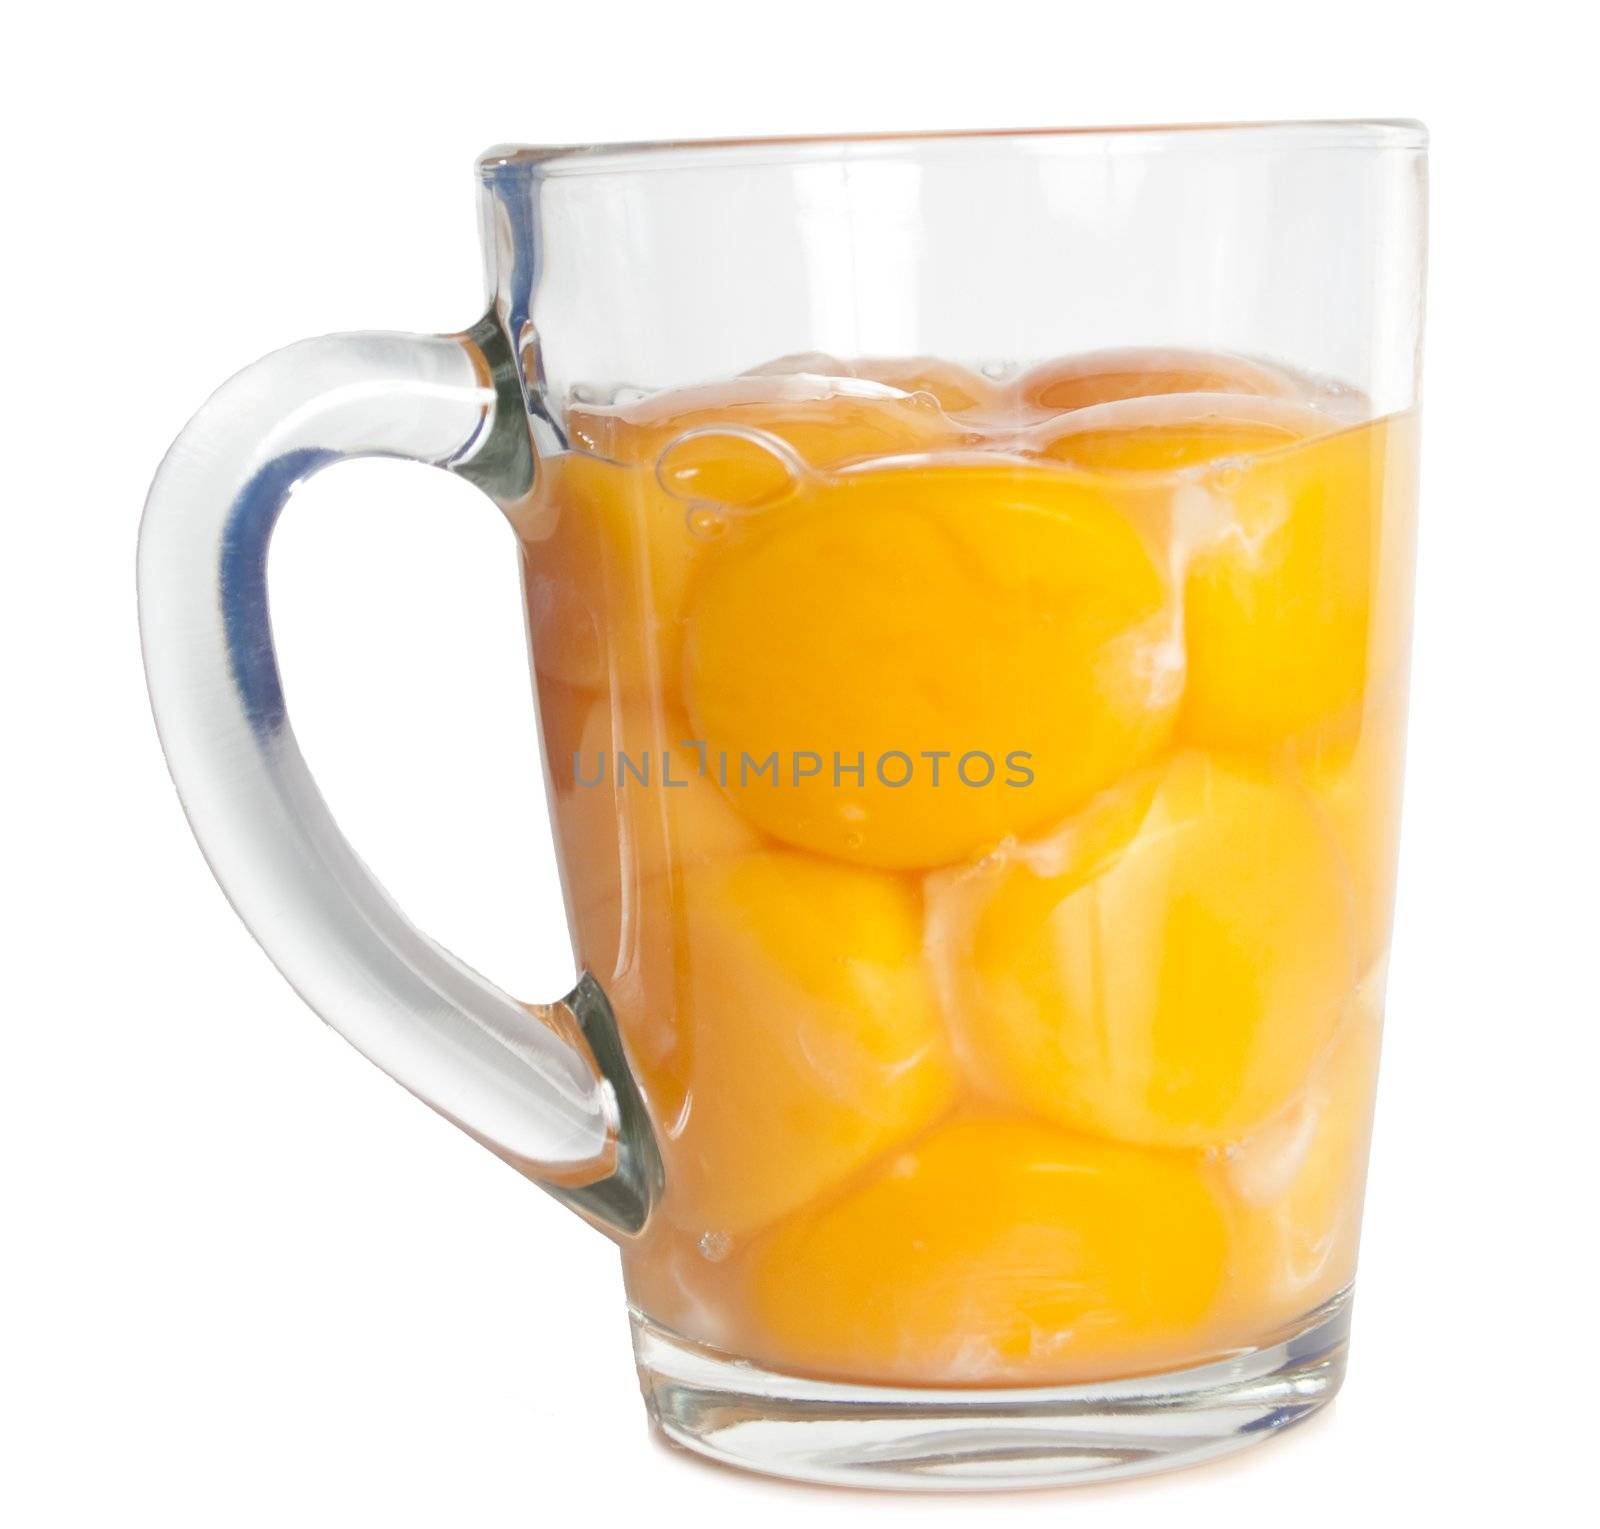 Yolks of eggs are in glass by kozak